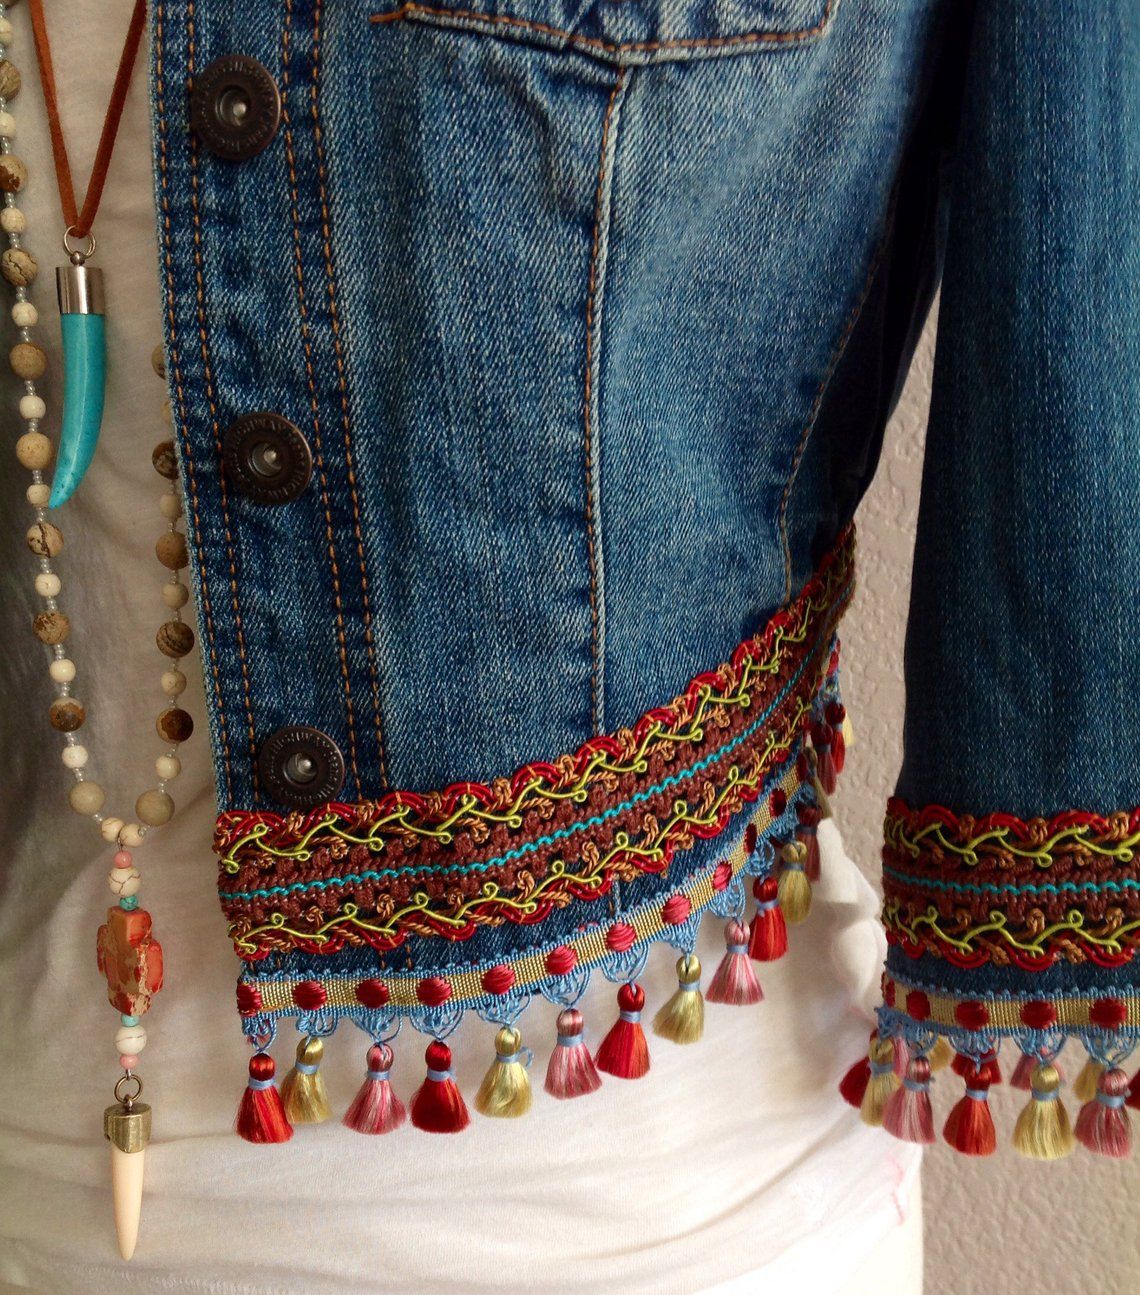 Mini irridescent/multi-colored tassels, embellished, BoHo Chic, Bohemian inspired, one of a kind, upcycled, eco-friendly denim jacket